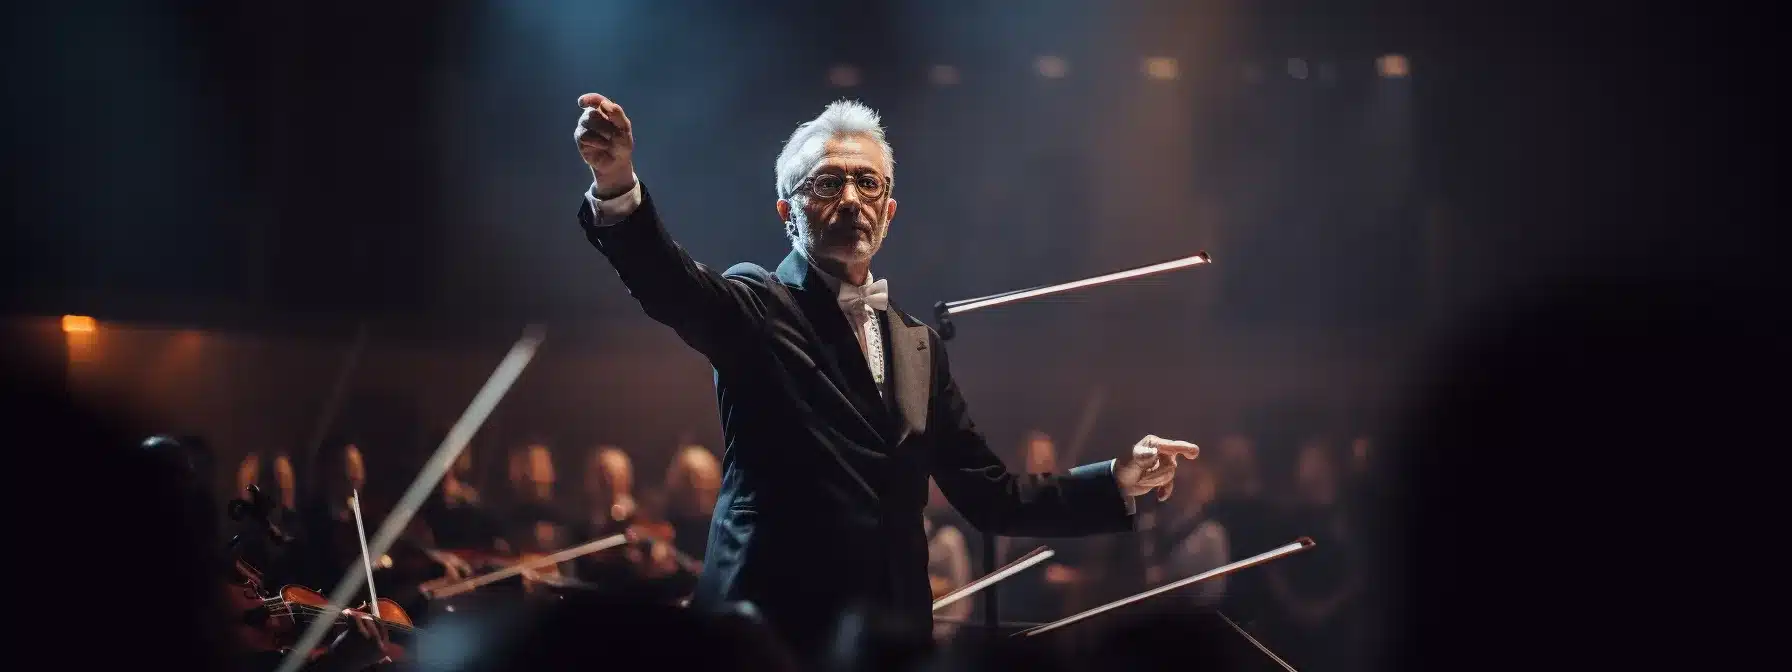 A Conductor With A Baton Leading A Symphony Orchestra.